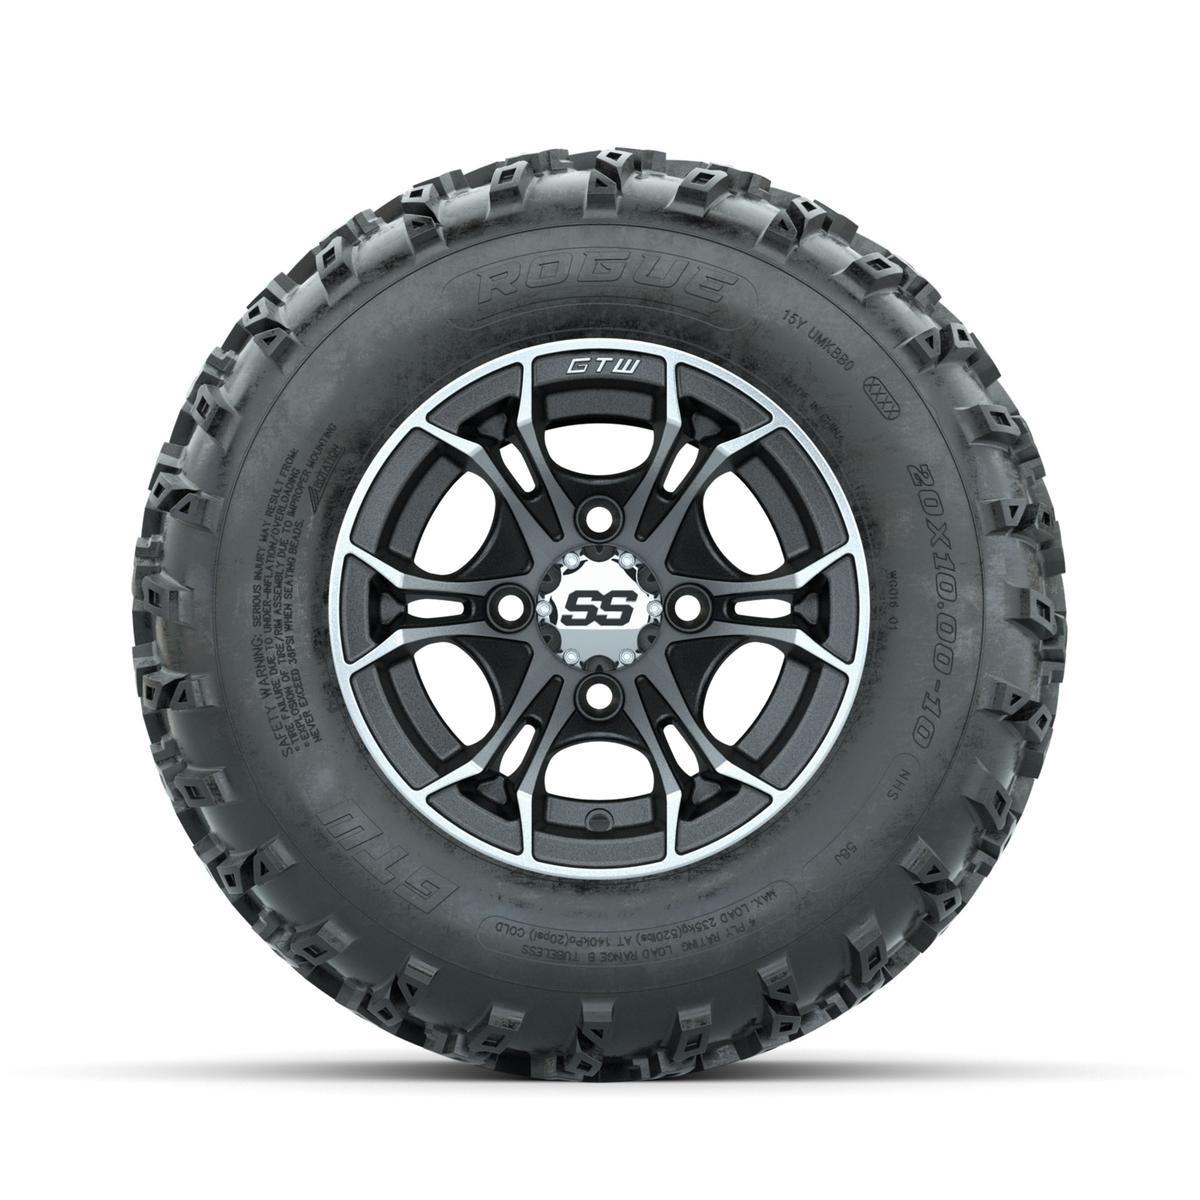 GTW Spyder Machined/Matte Grey 10 in Wheels with 20x10.00-10 Rogue All Terrain Tires – Full Set